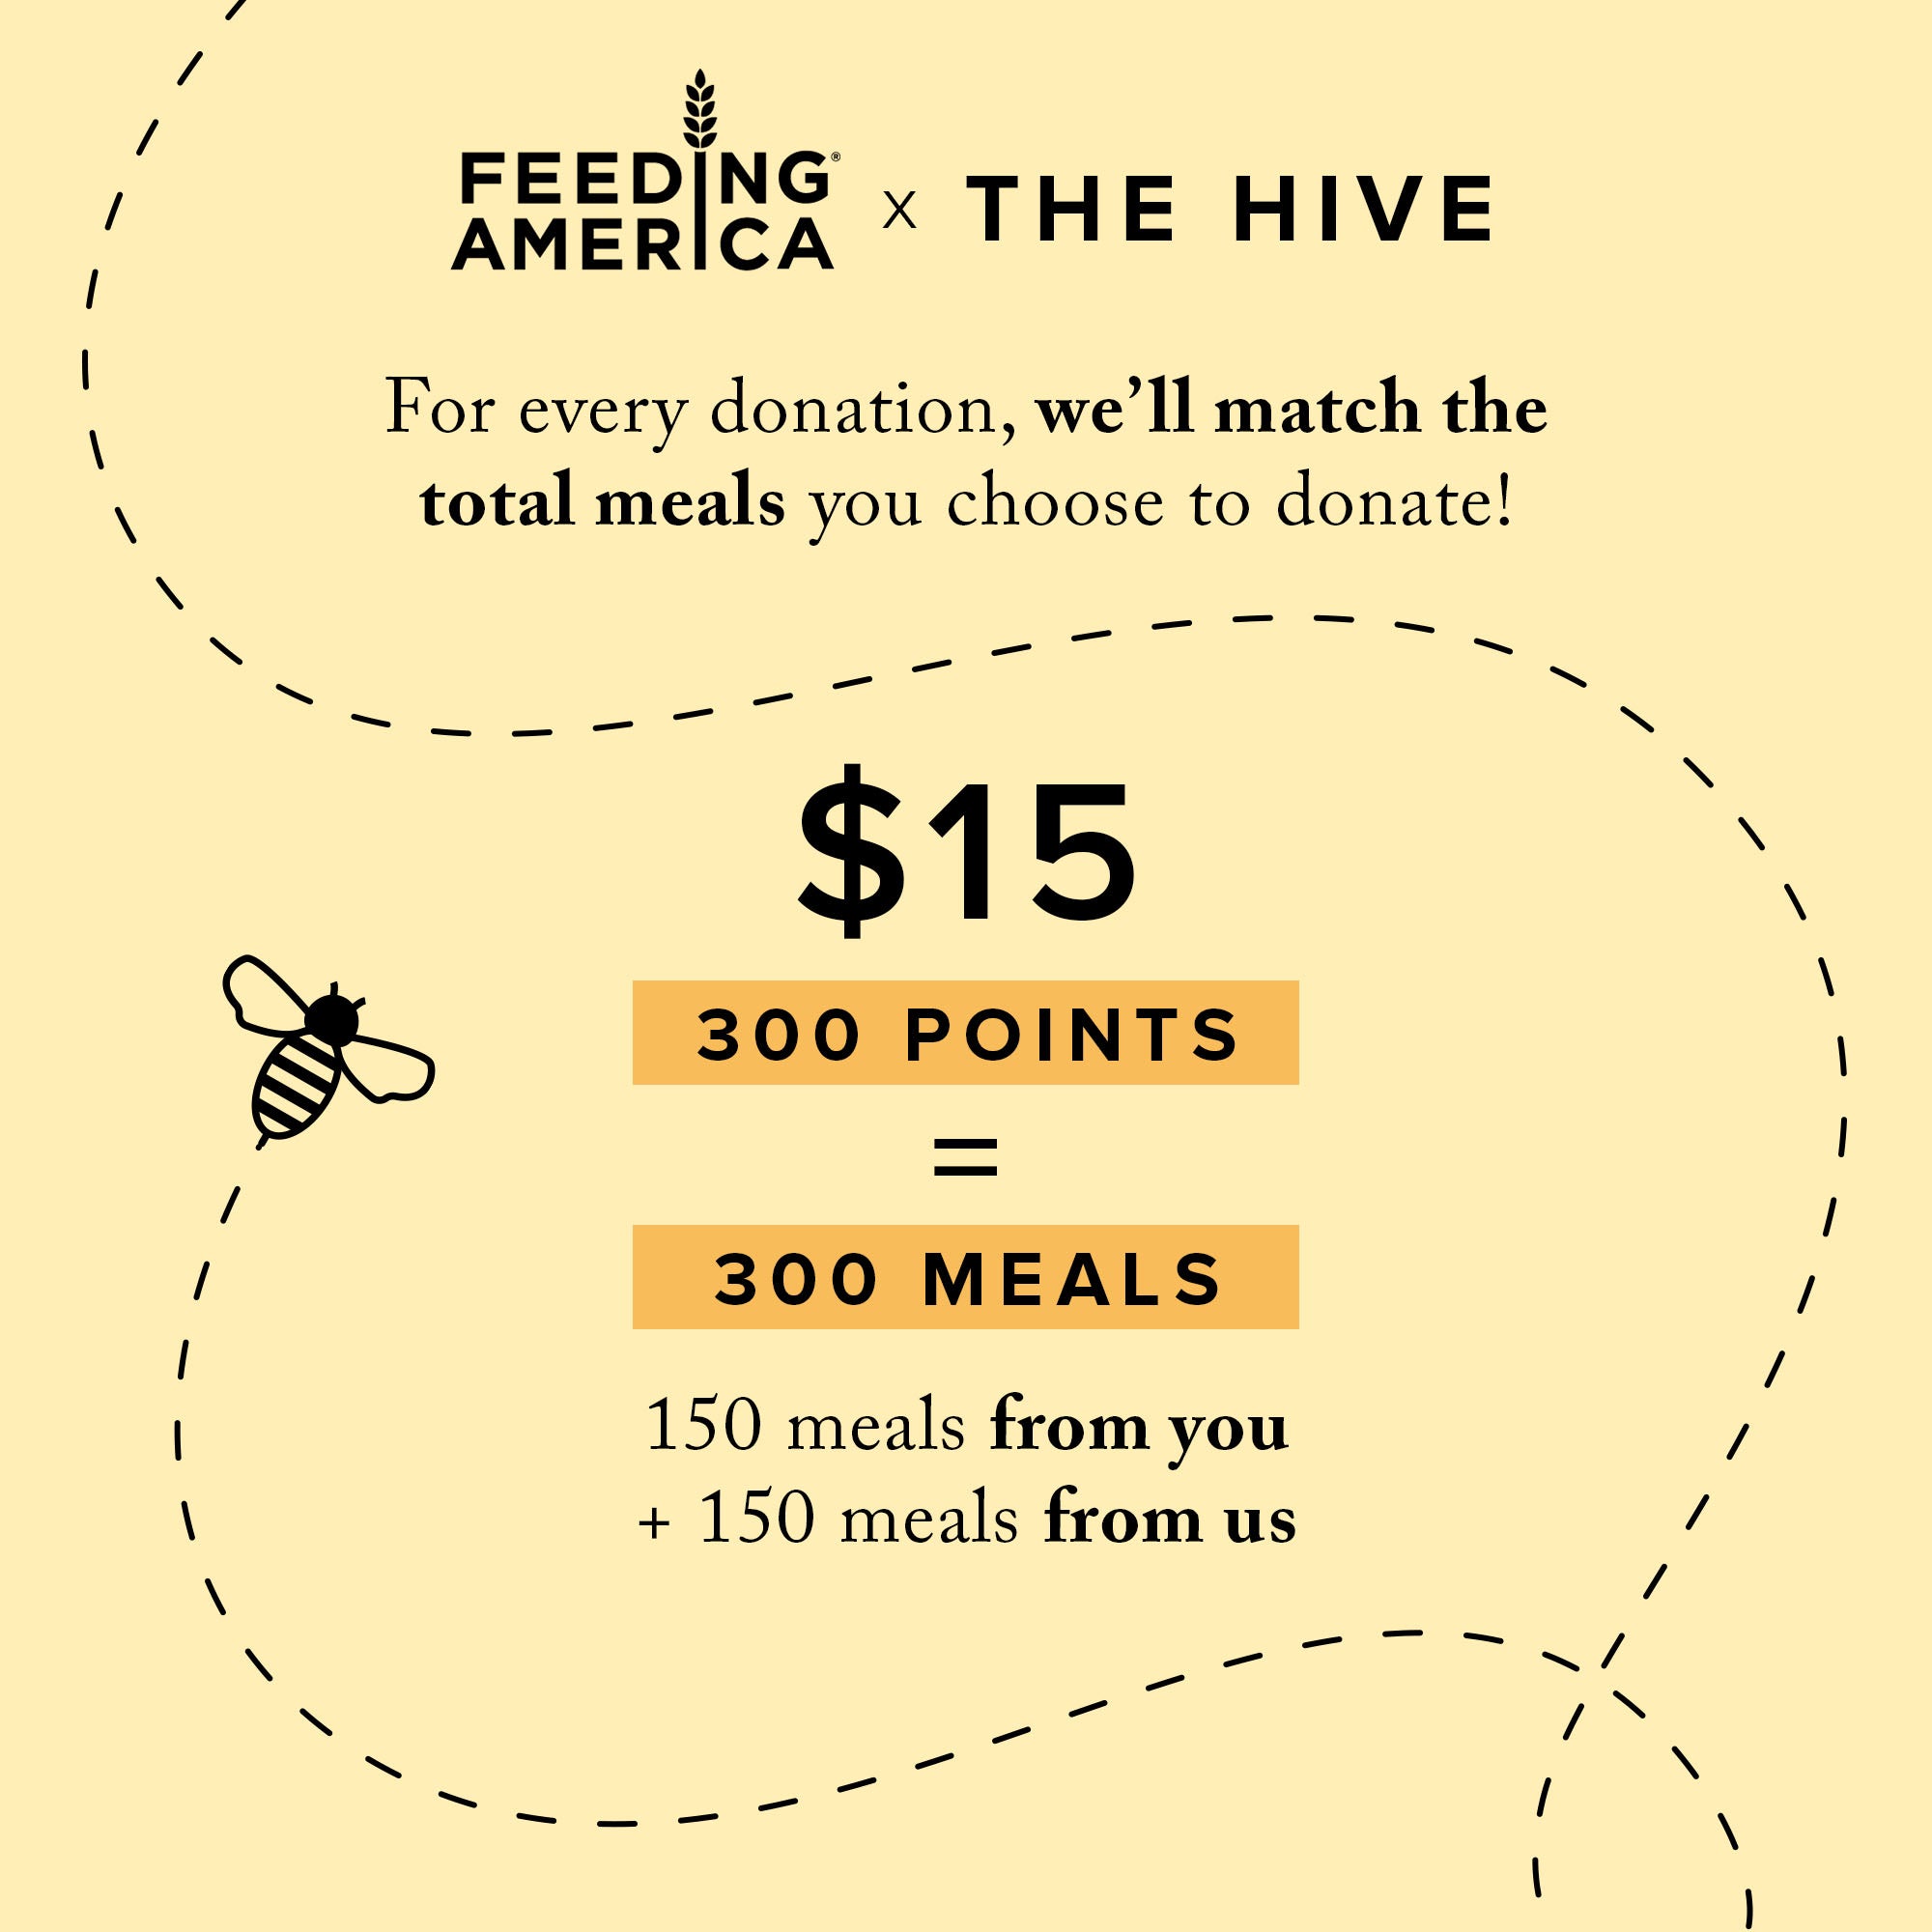 The Hive x Feeding America 300 Meals Donation